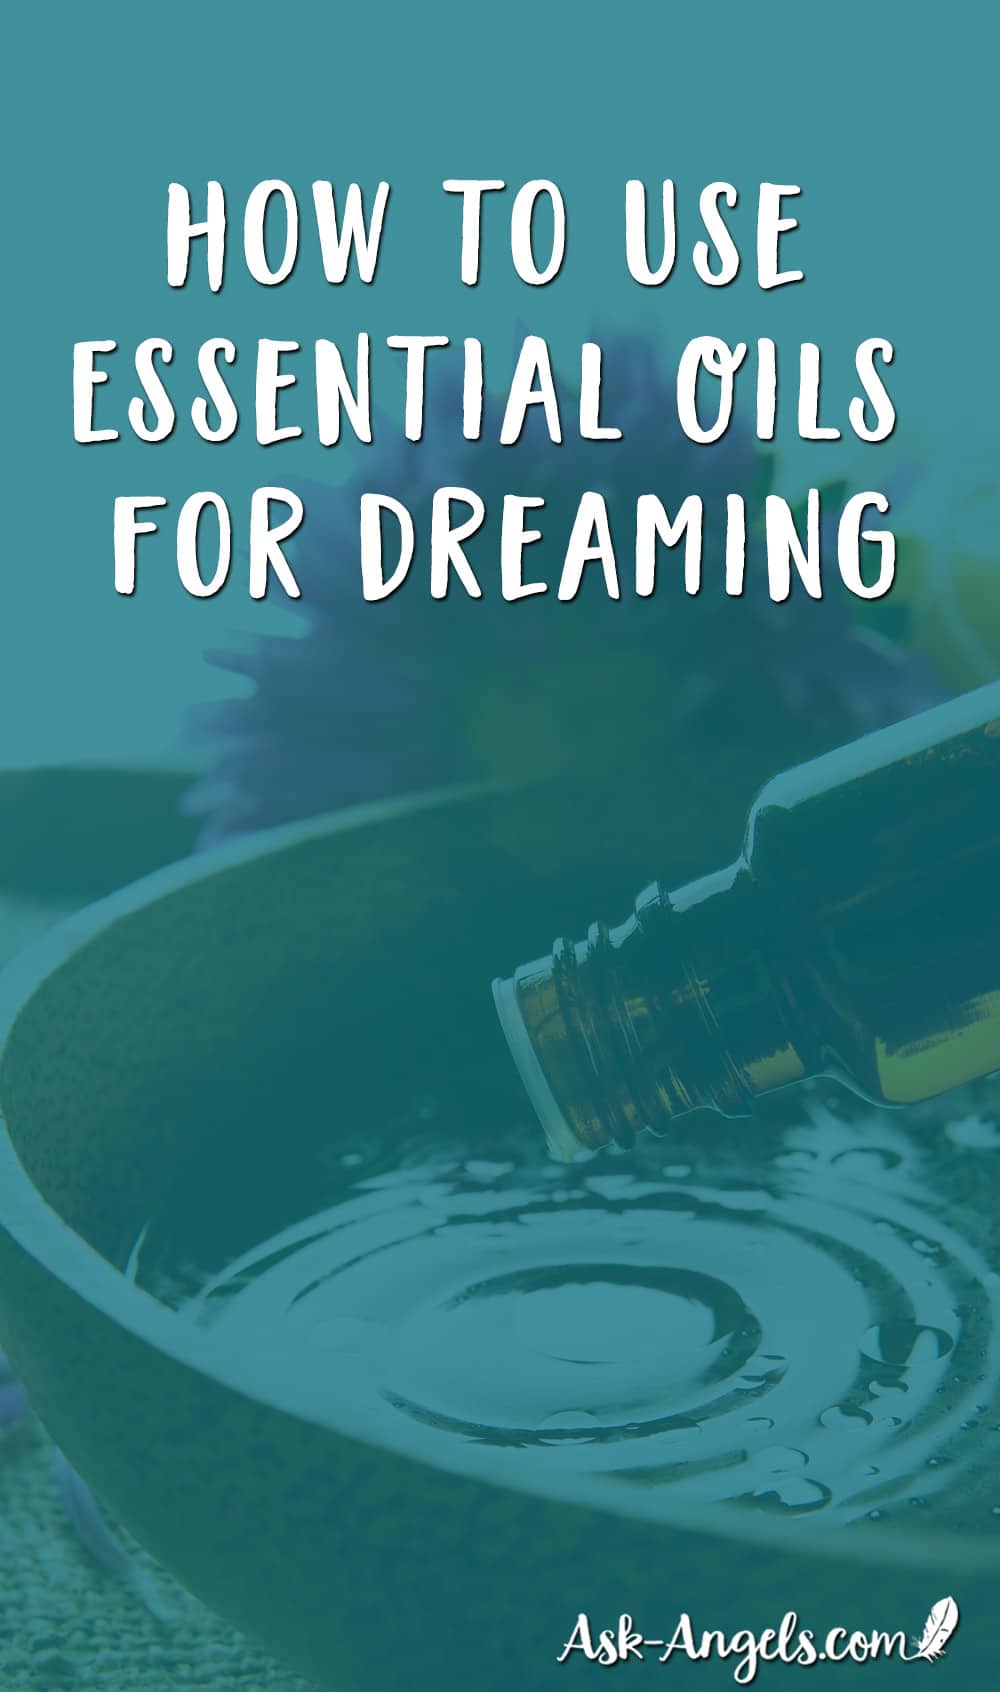 How to use essential oils for dreaming